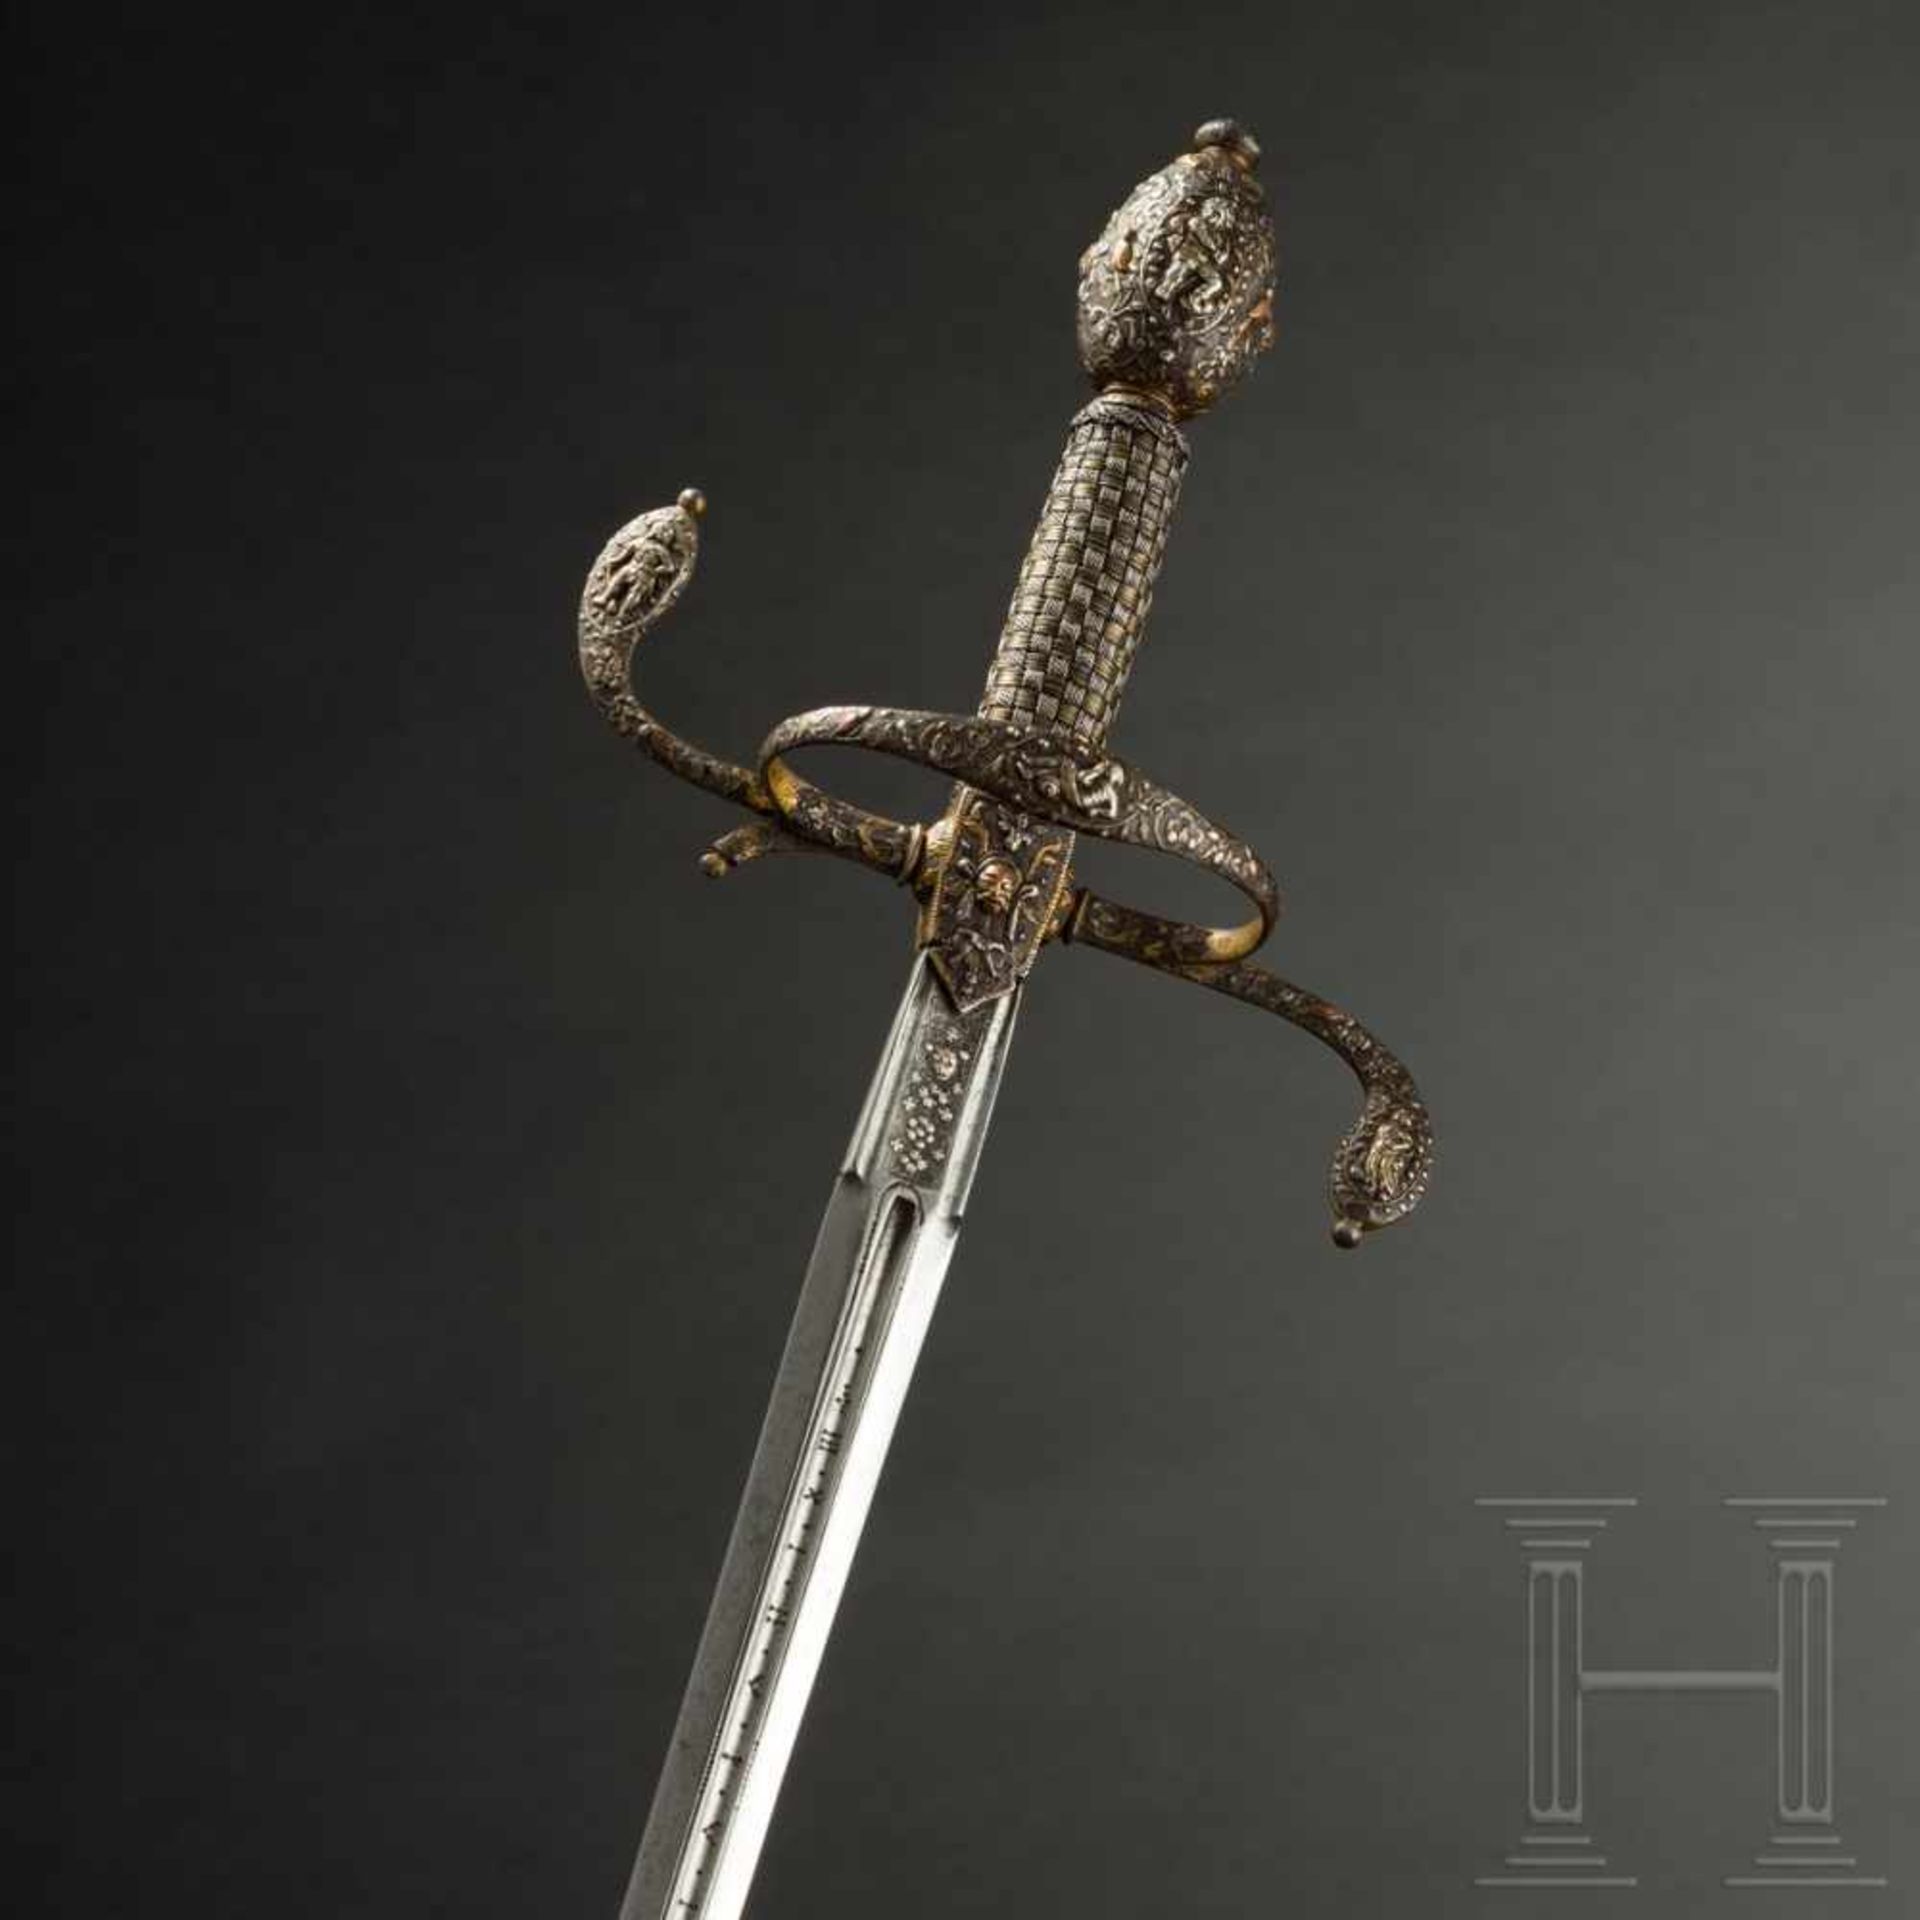 A significant German deluxe rapier, circa 1620The narrow, double-edged blade of flattened diamond